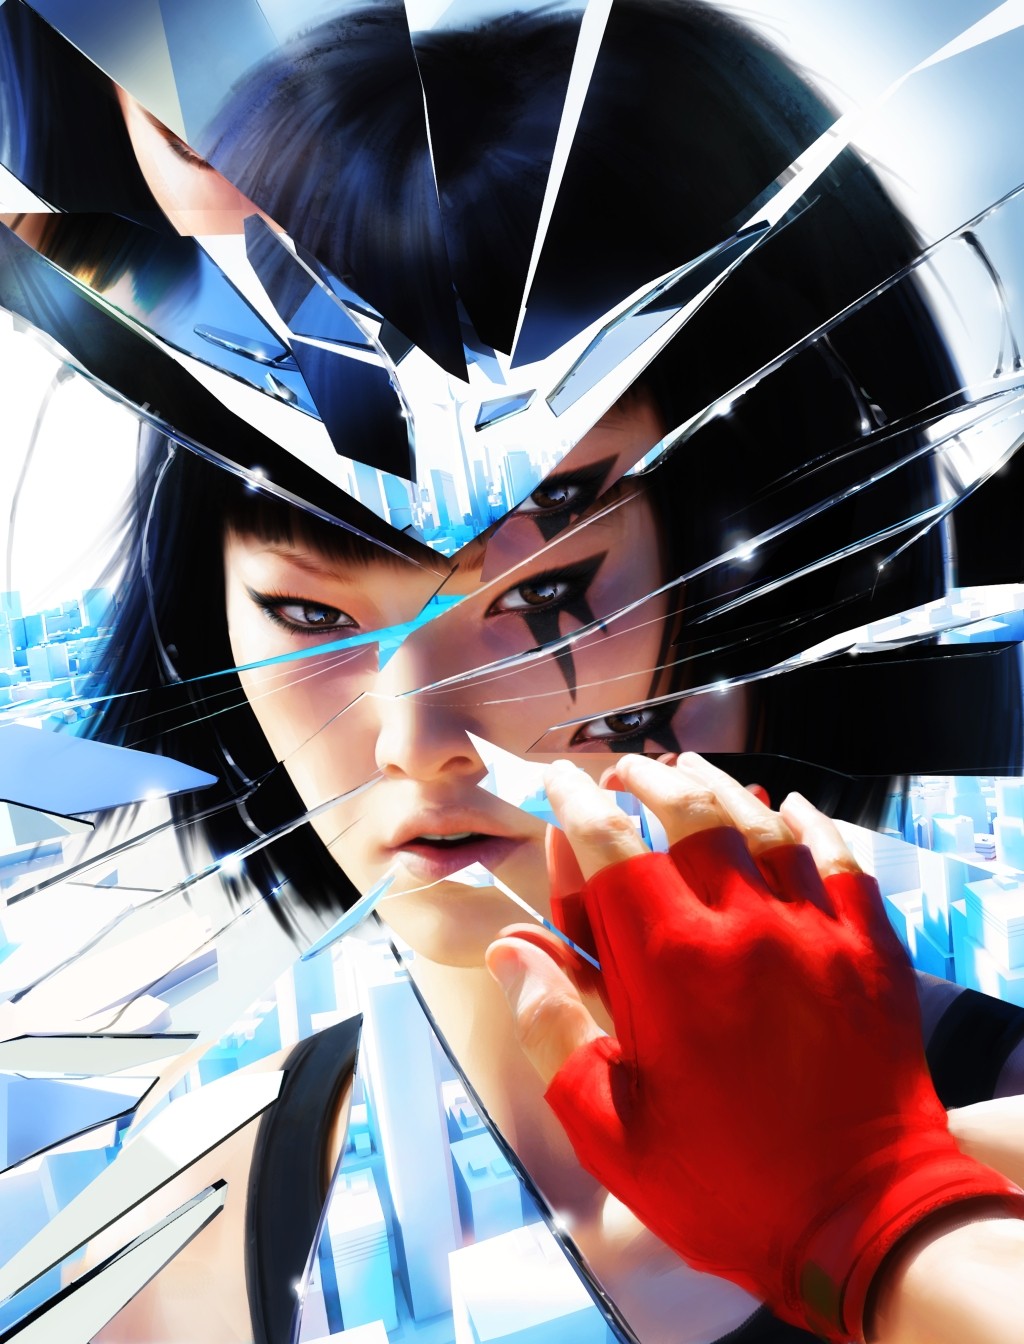 General 1024x1344 video games mirror Mirror's Edge Faith Connors dark hair broken glass reflection PC gaming video game art EA DICE Electronic Arts video game girls